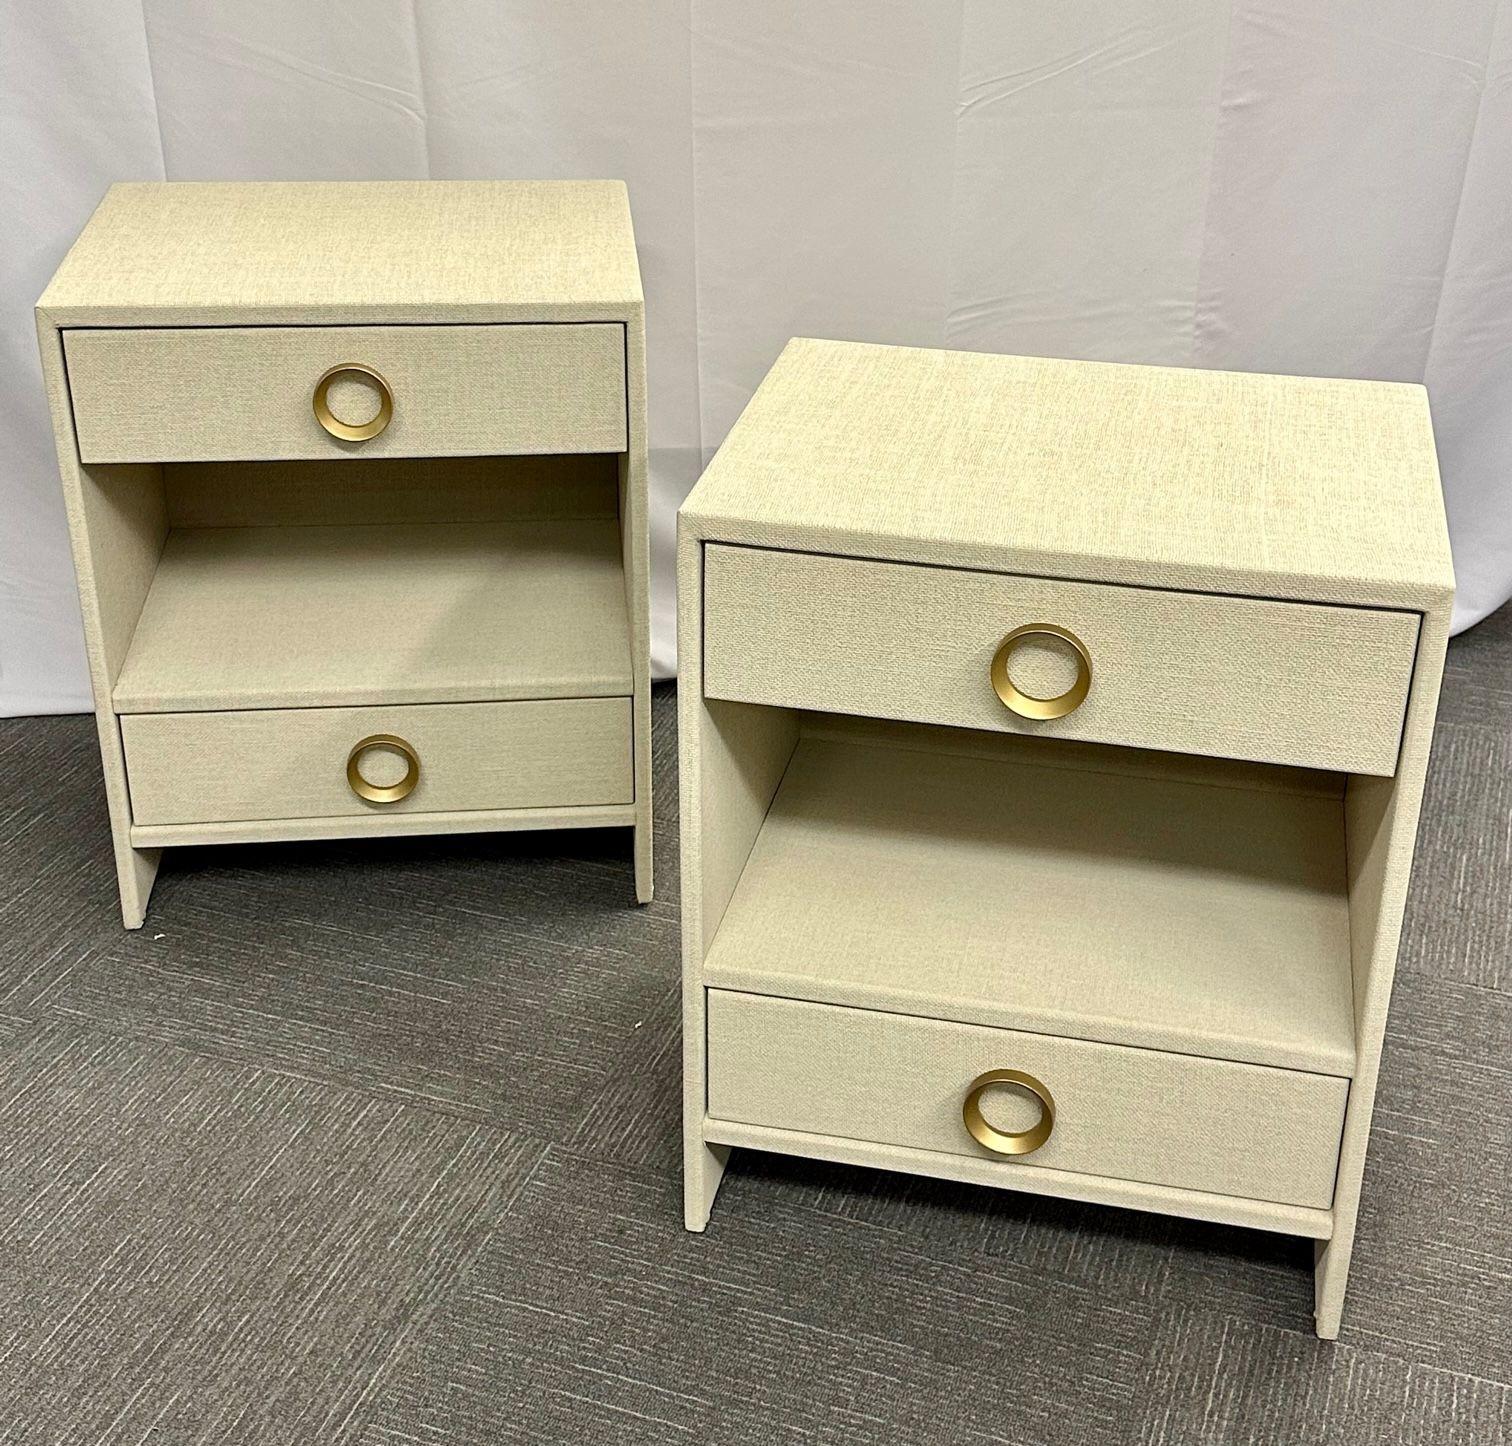 Pair of Modern Linen chests, commodes or nightstand, Linen Wrapped, American
Custom quality pair of chests each wooden wrapped in Linen made in America. This finely decorative pair of bedside tables or end tables are wide and quite functional in